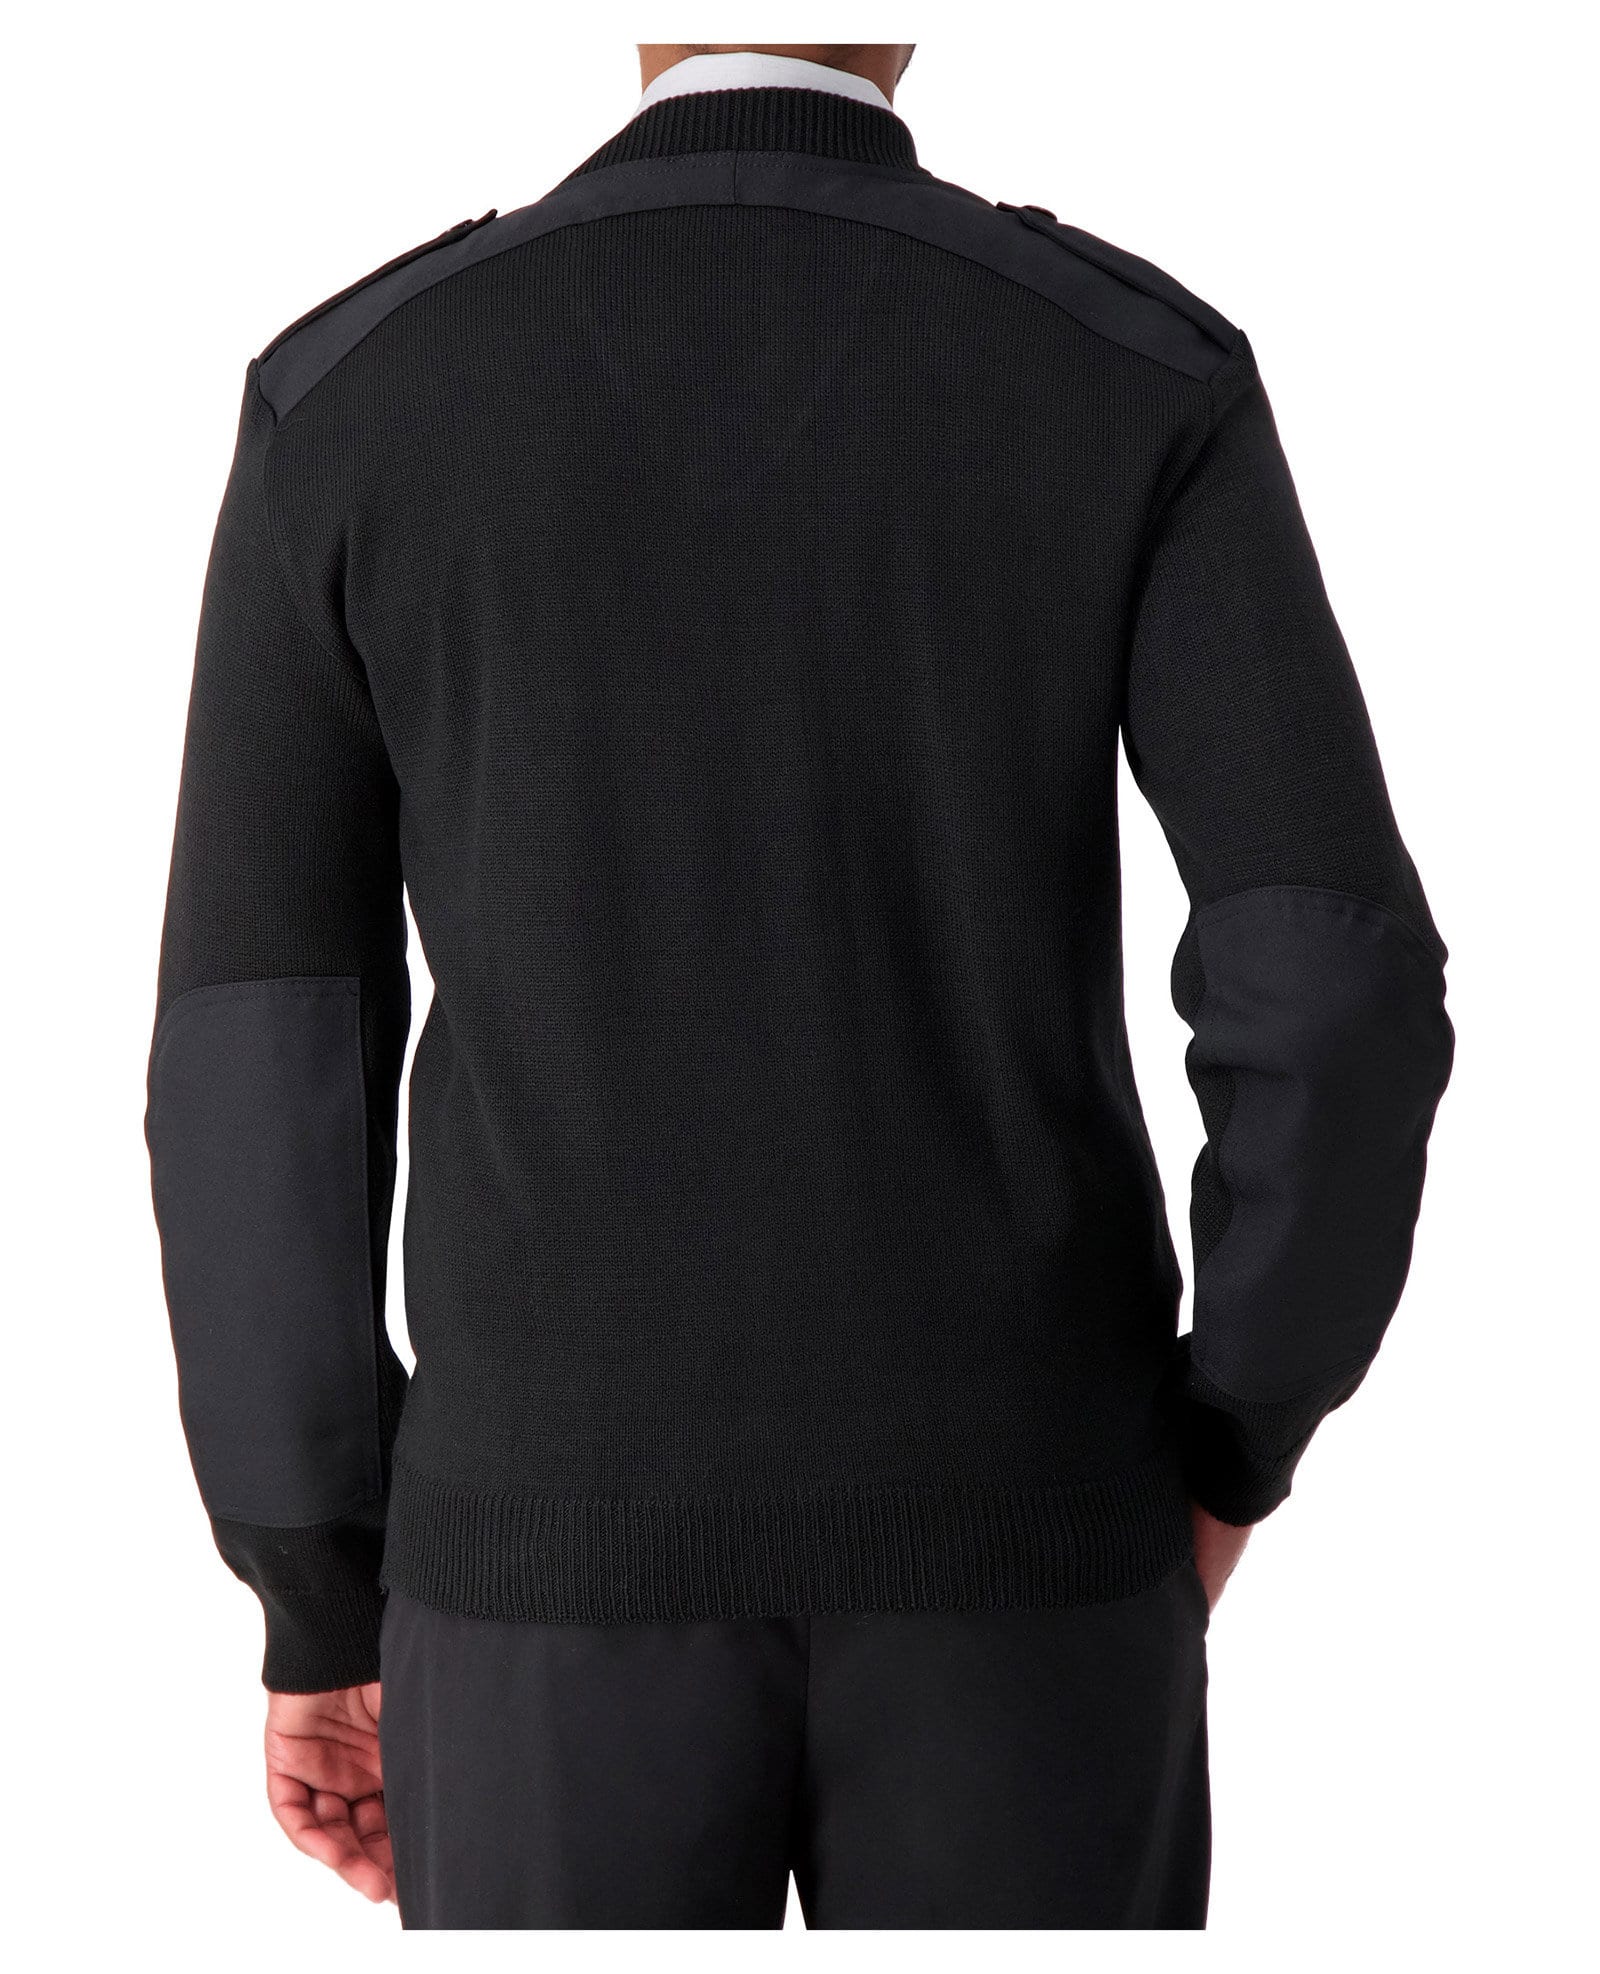 back of black v-neck sweater with shoulder and elbow patches 